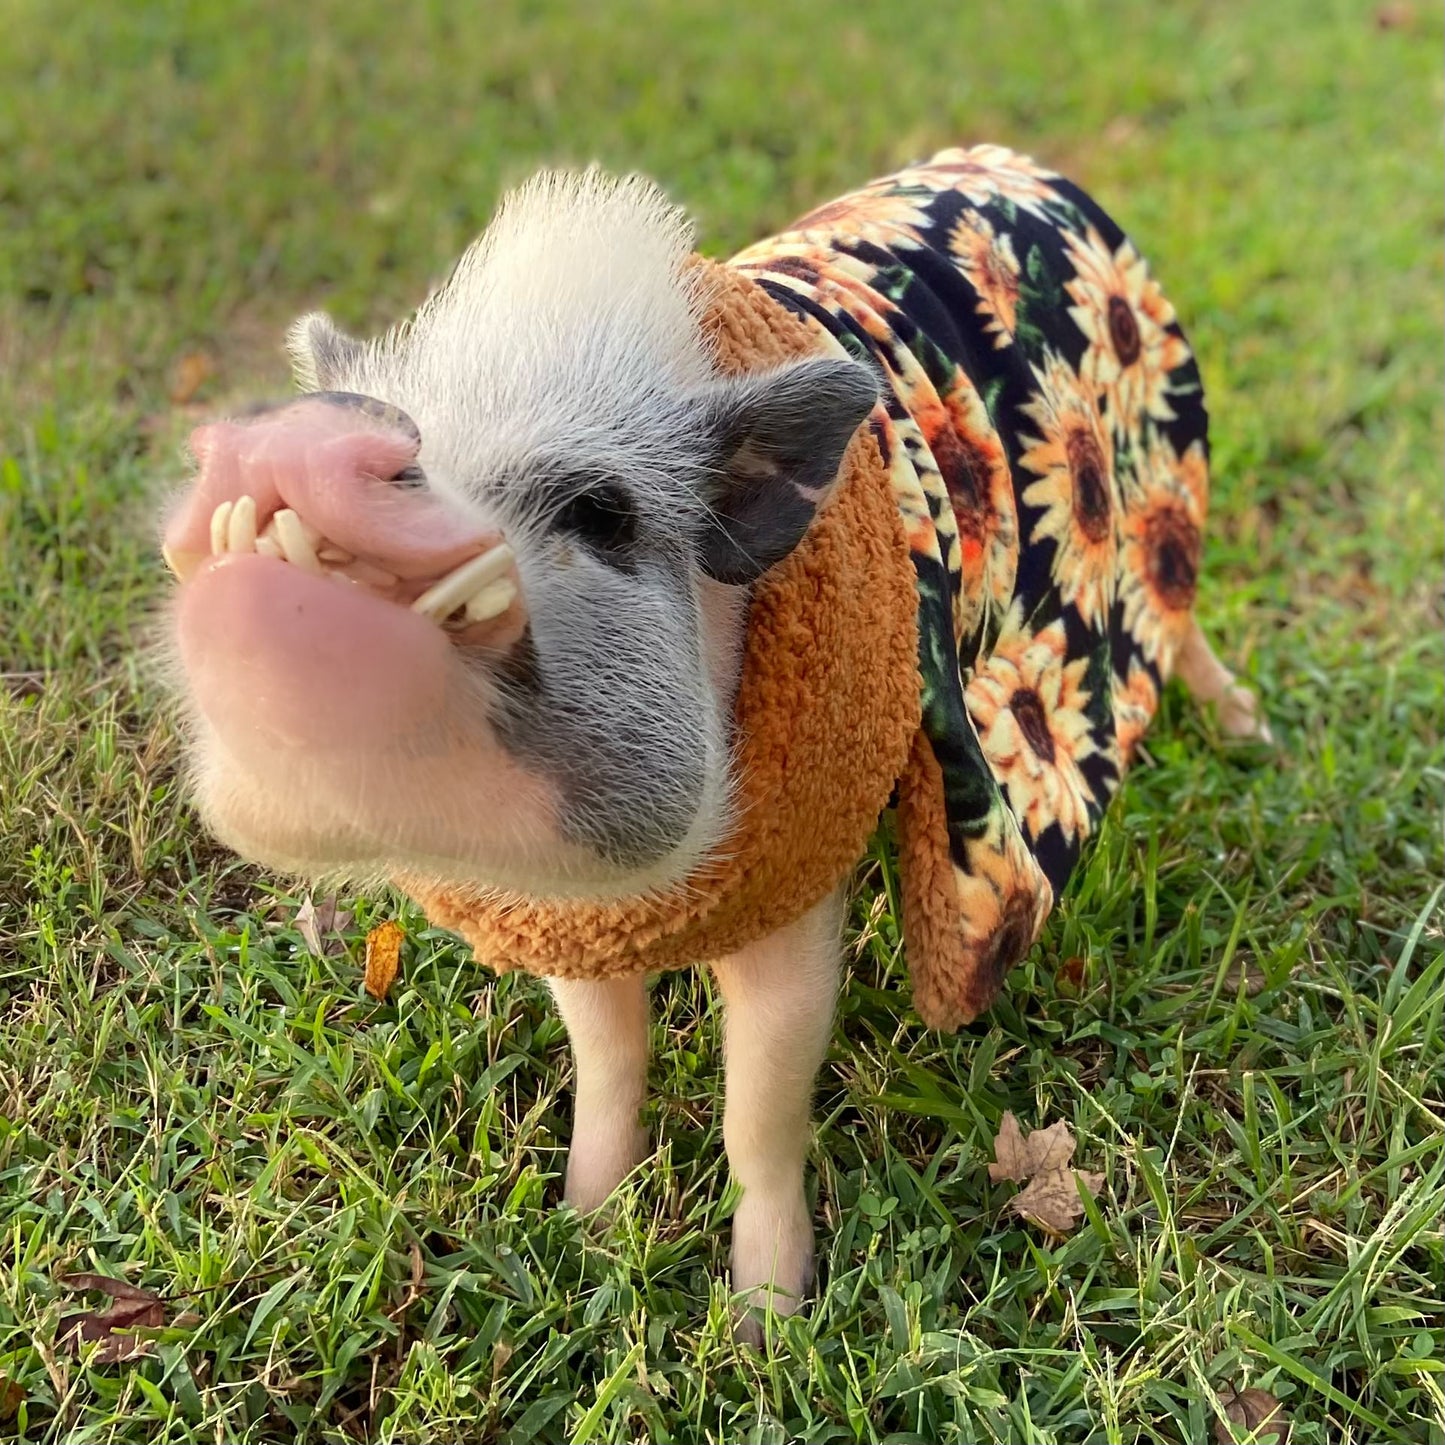 Perfect Pig Pet Sweater Handmade with Sherpa Collar, Fleece, and Belly Strap, Mini Pig Clothes for Potbelly Pigs, Kune Kune and Guinea Hogs